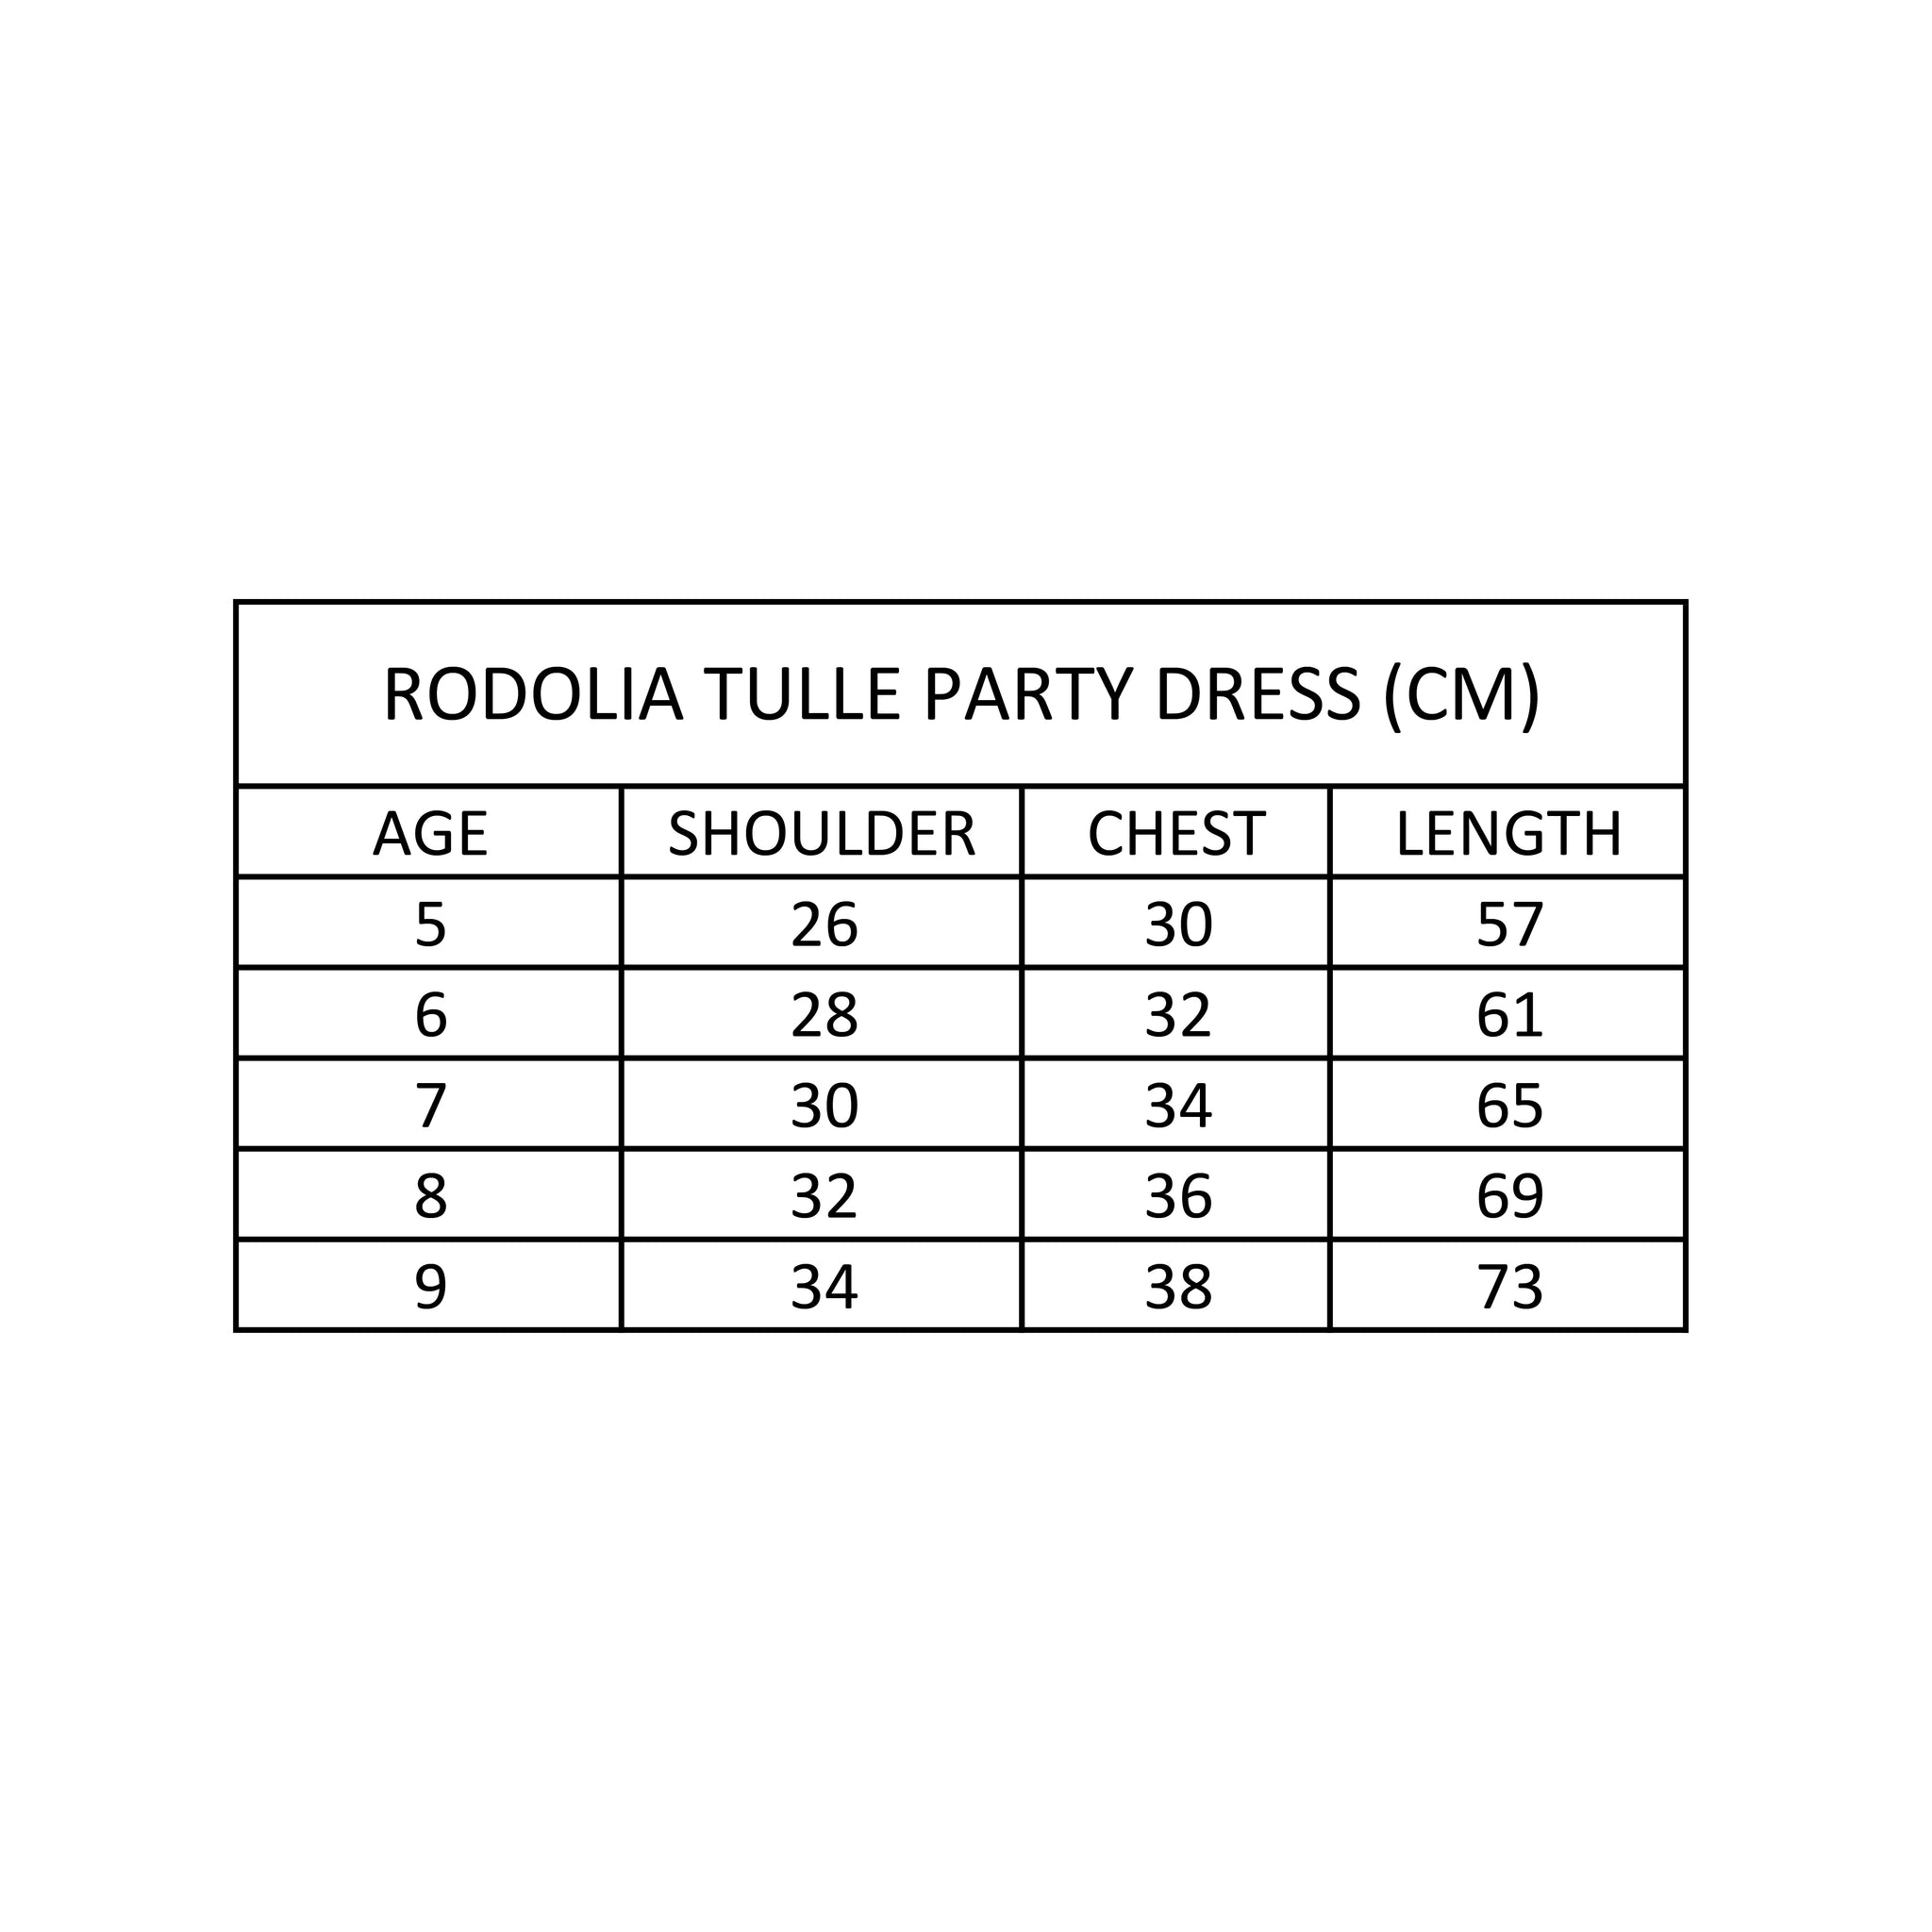 Rodolia Tulle Party Dress